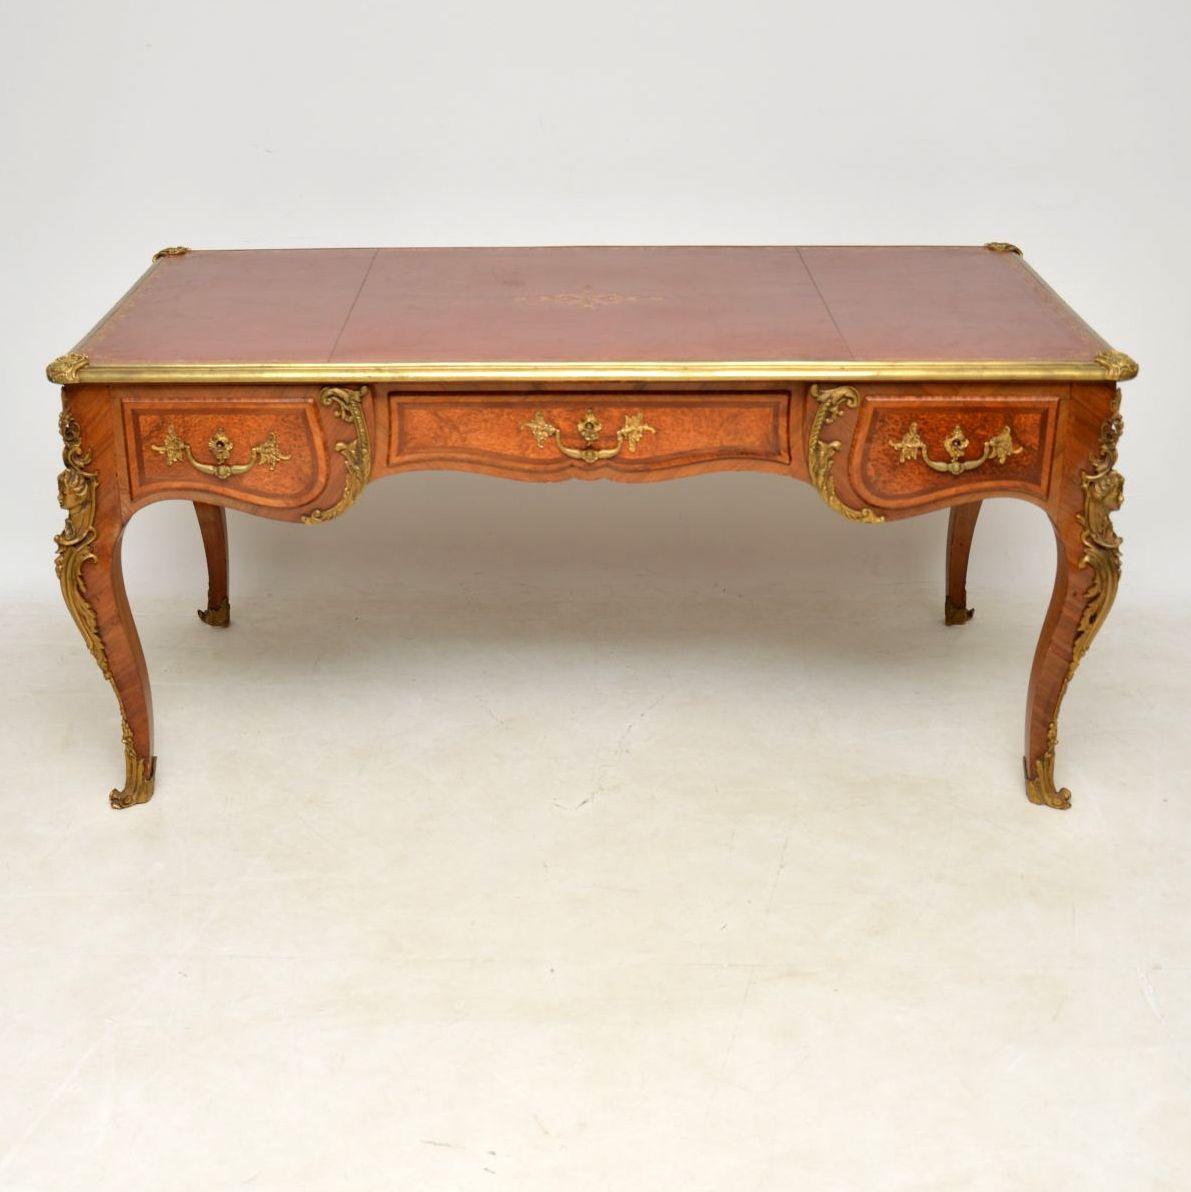 Large antique French desk with an original tooled leather writing surface and fabulous gilt bronze mounts. I would date it to circa 1890-1910 period and it’s in good original condition. It’s excellent quality with oak lined drawers and Fine